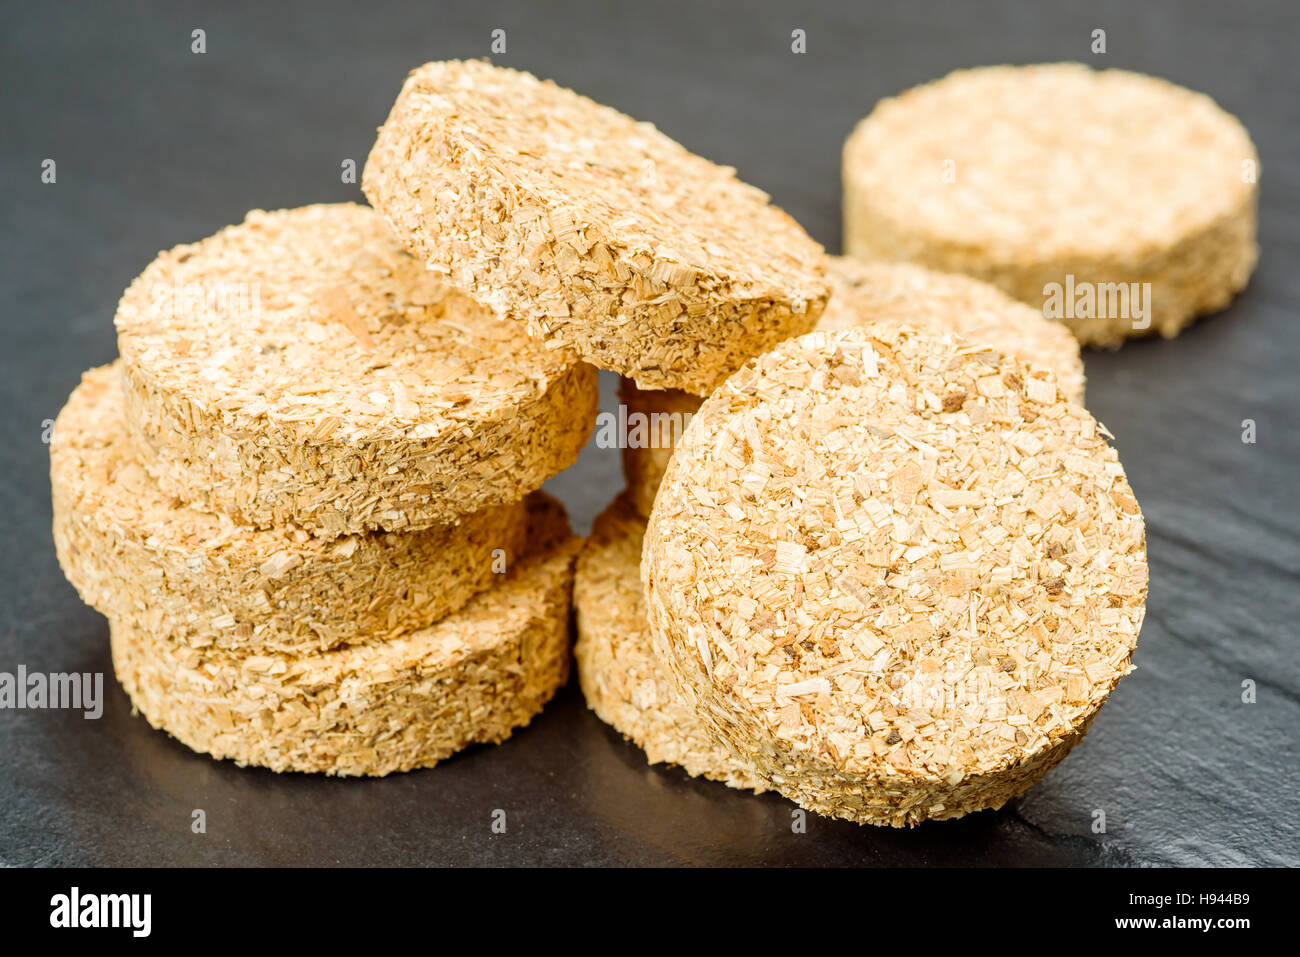 Stacks of hardwood smoker bisquettes made of wood chips. Stock Photo